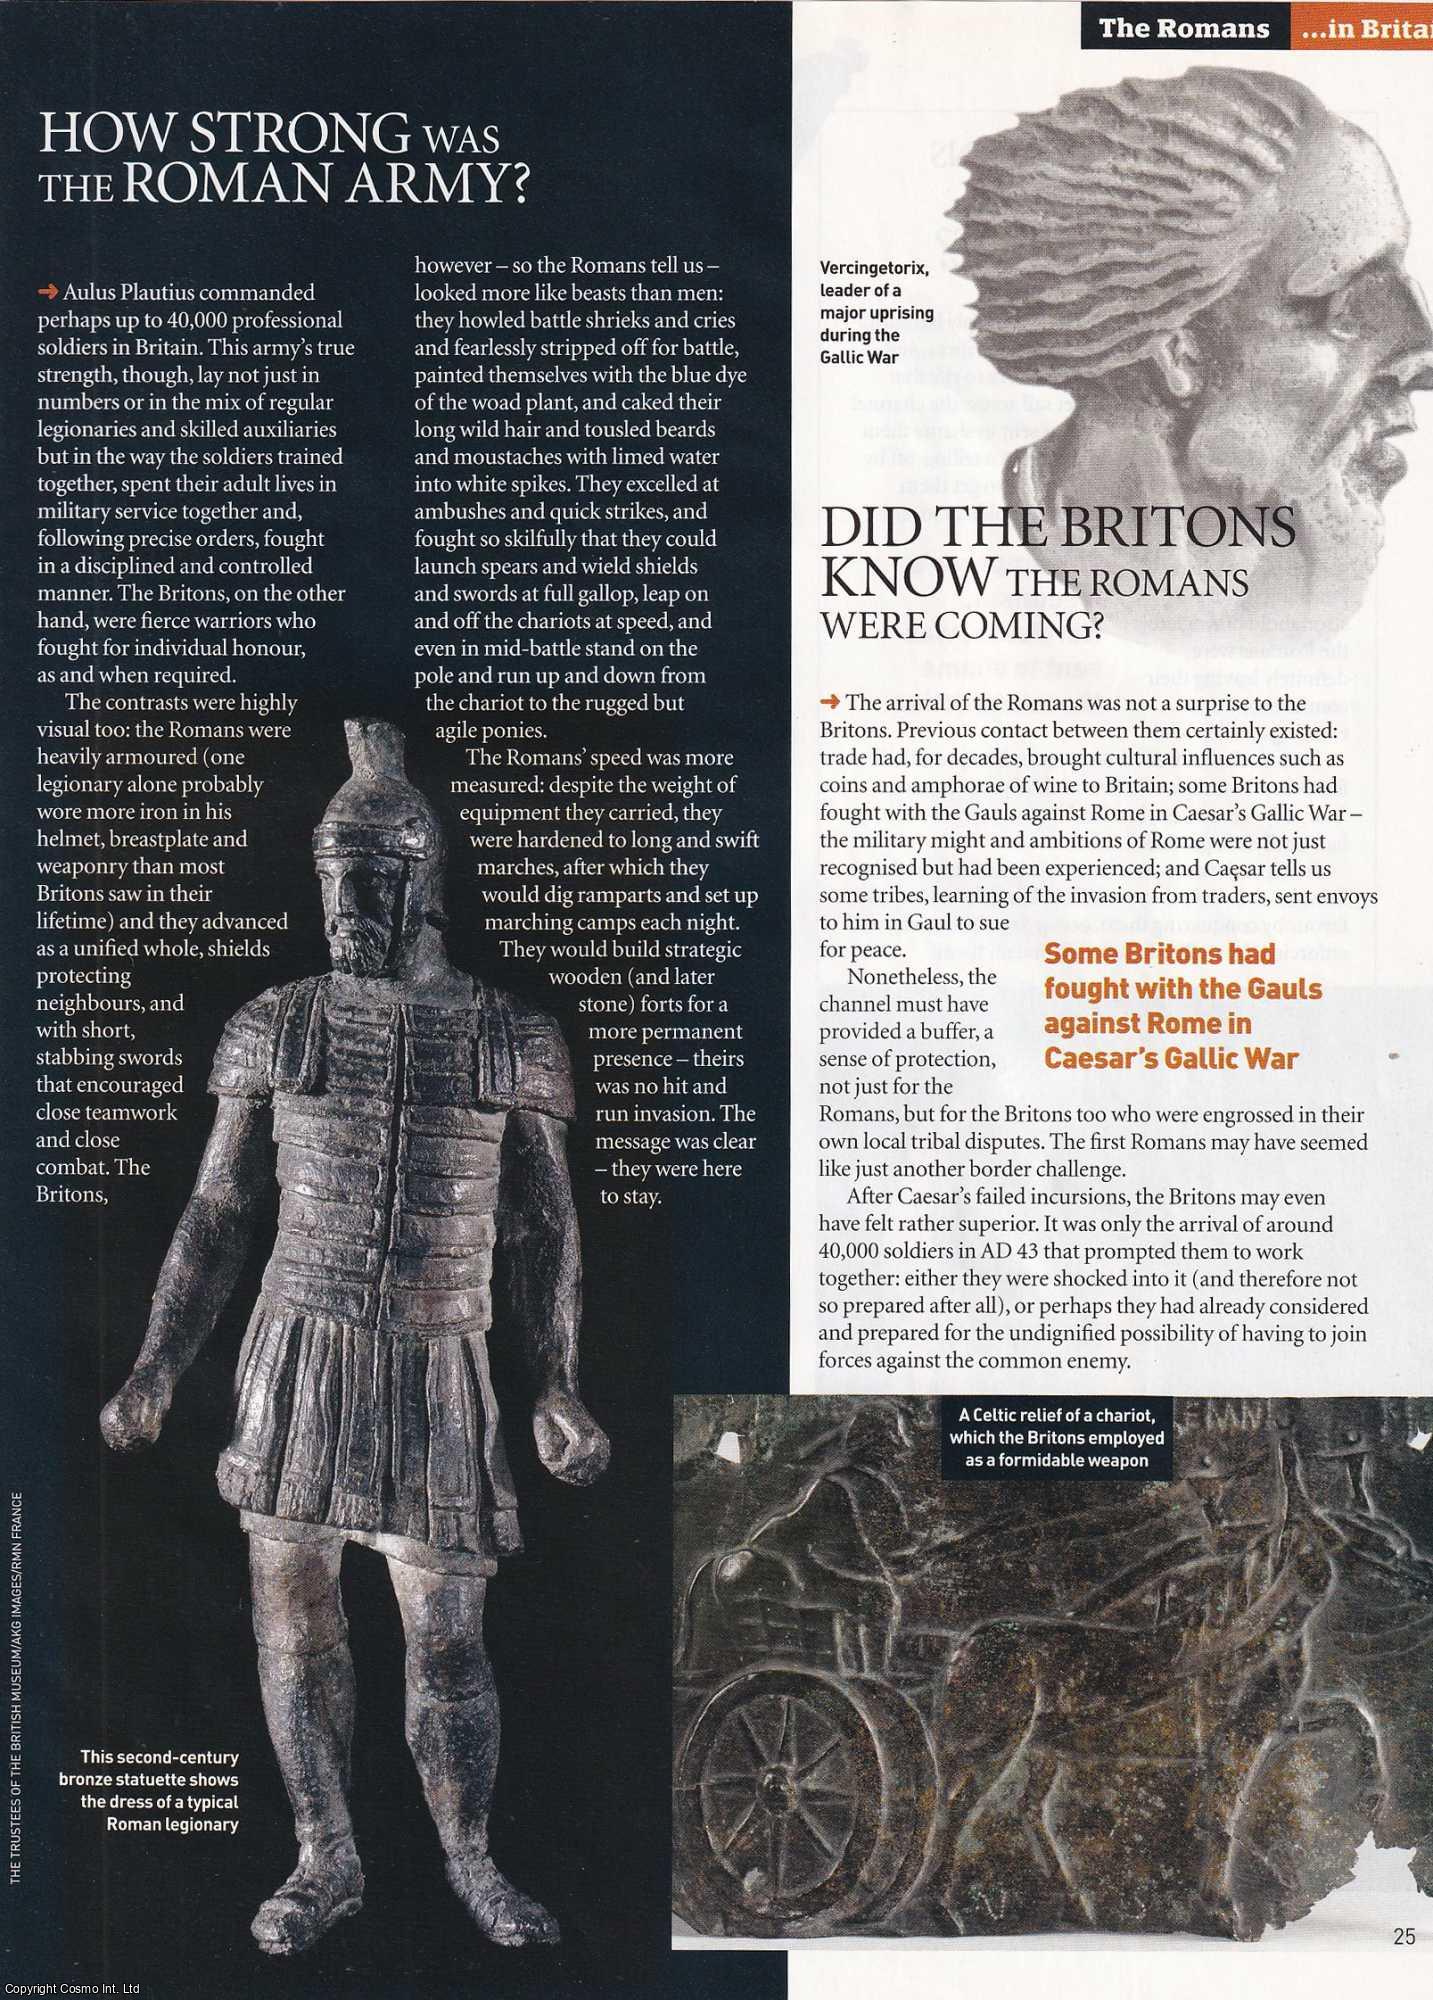 Gillian Hovell - The Roman Invasion: Whose Side were the Britons on? An original article from BBC History Magazine, 2012.